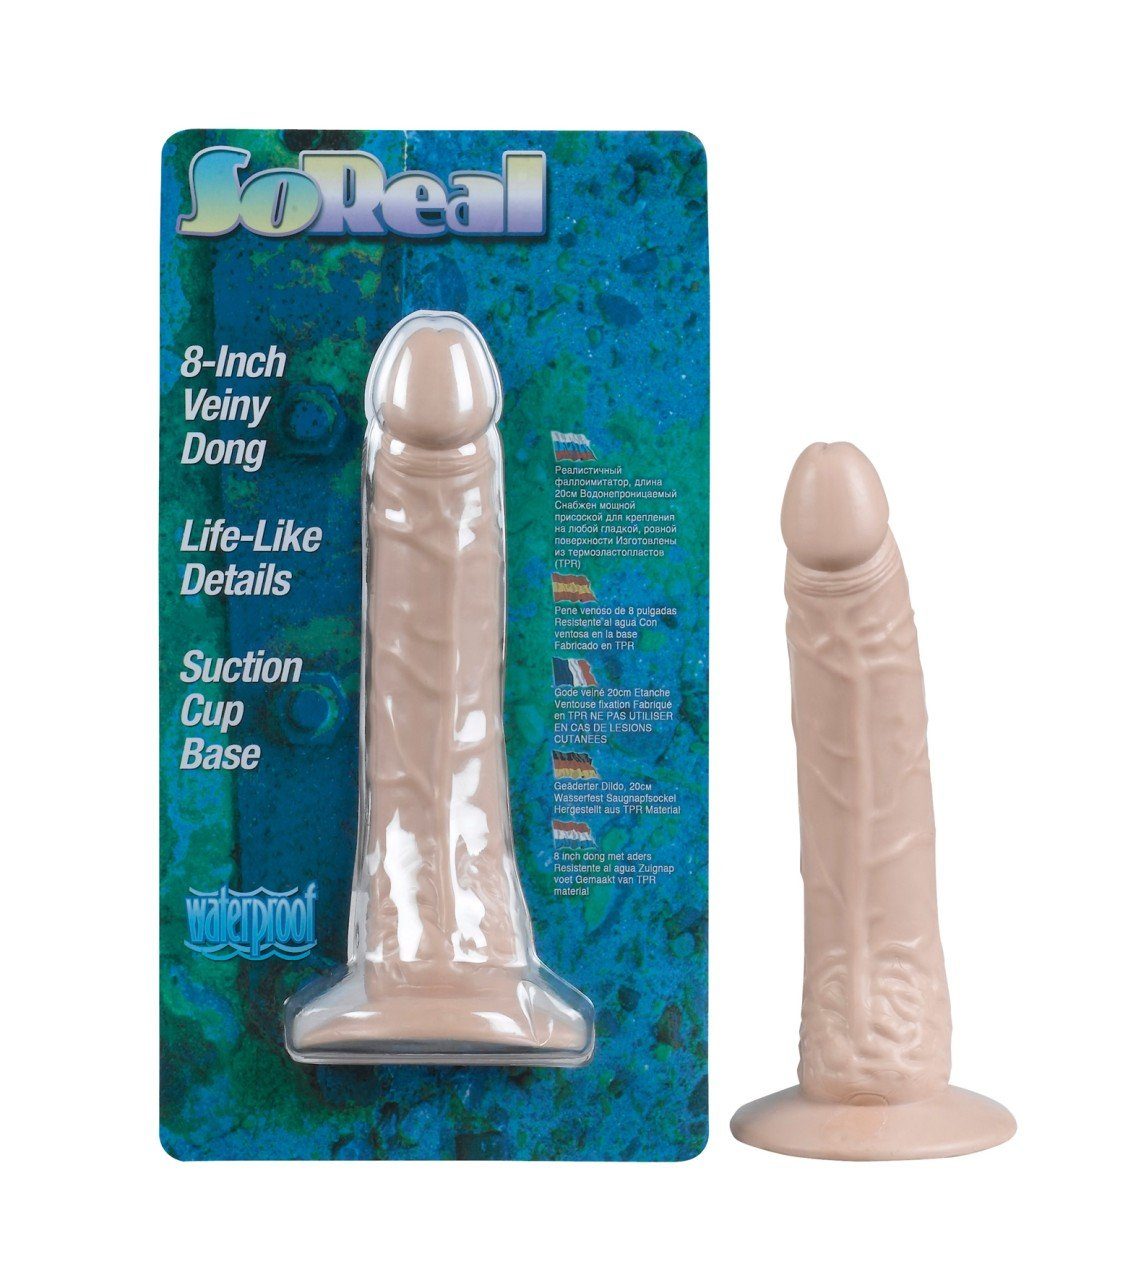 SO Creations Natürliche für Creations,Dildos Form,Import-S Cup with Dong Dildo REAL Toys Suction (L,XL), Veiny - Seven Alle,Dildos,Seven